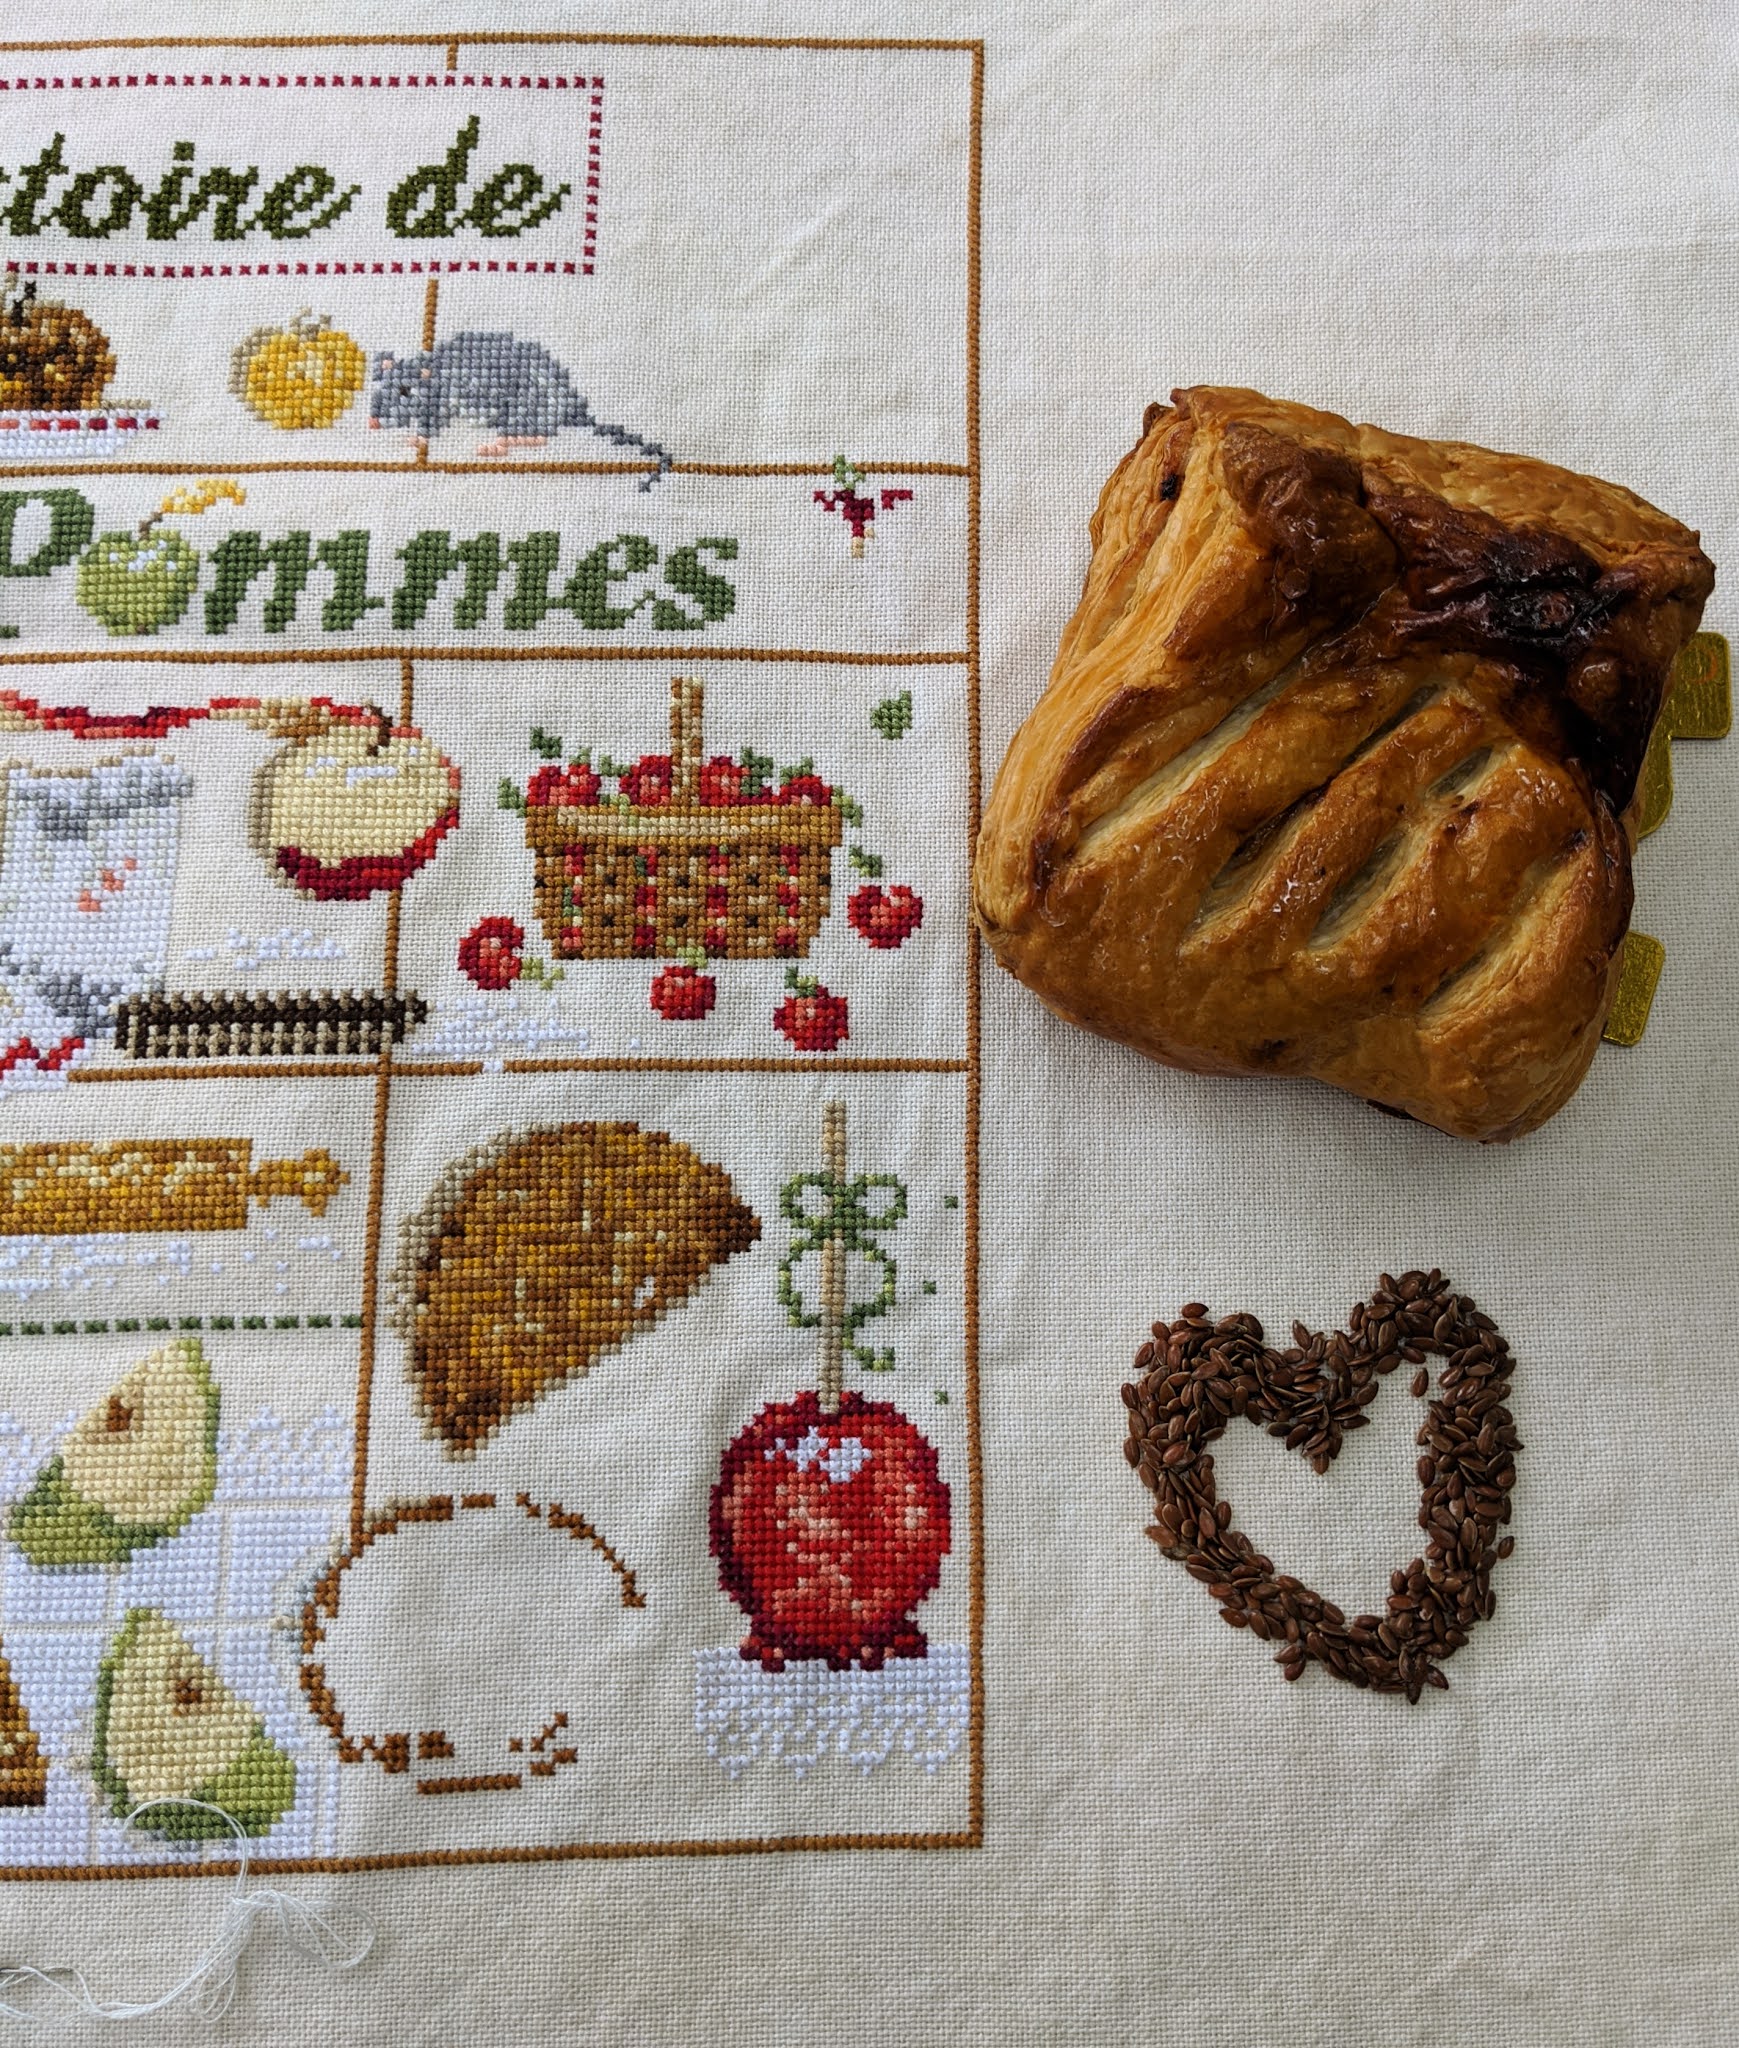 Bear, Dolly and Moi: histoire de Pommes cross stitch embroidery